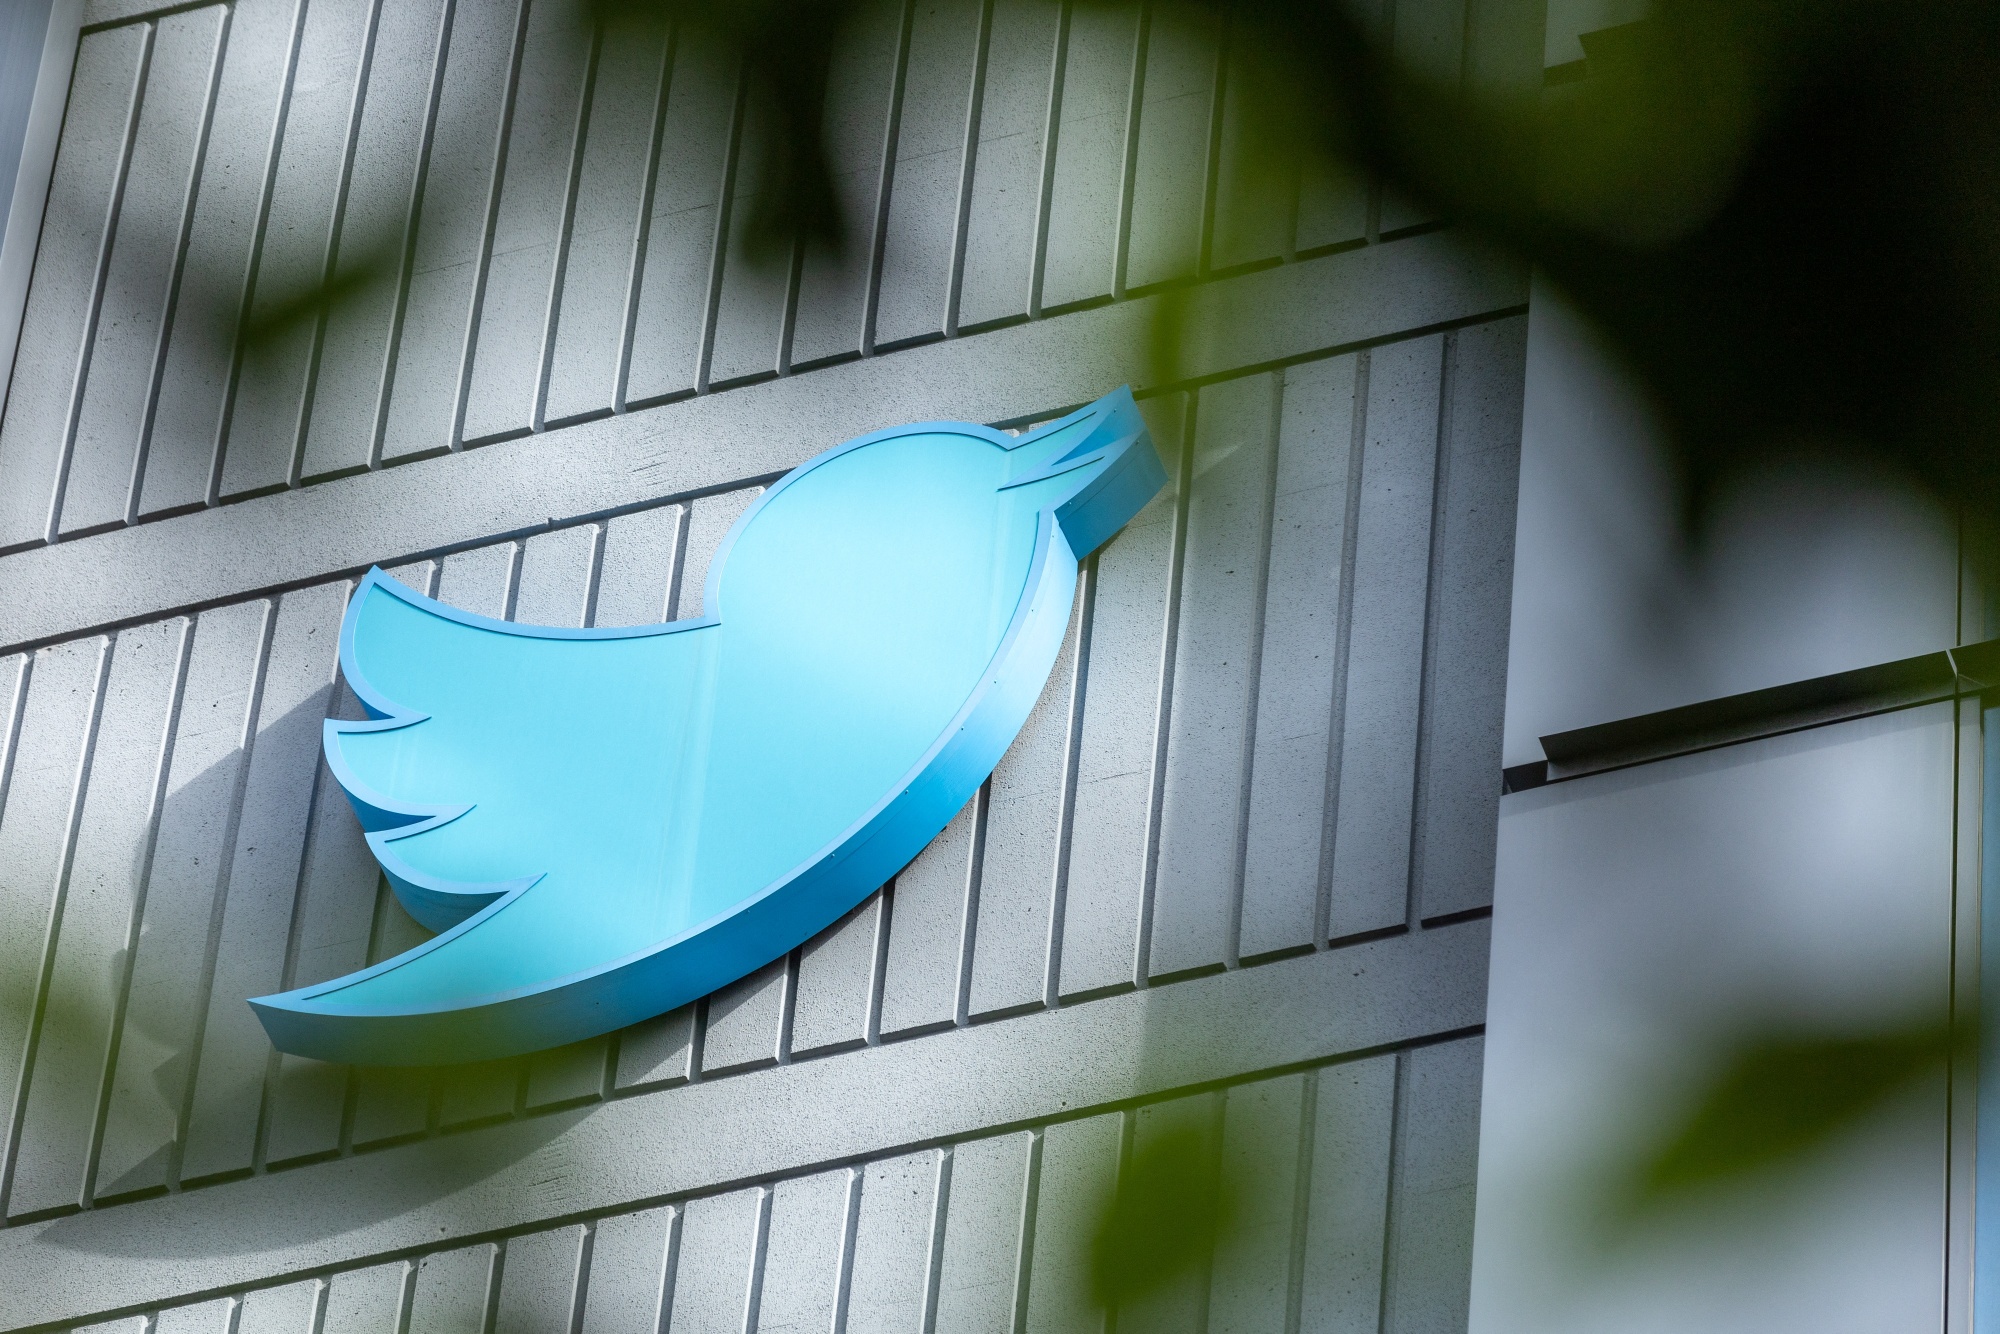 Twitters Surge in Harmful Content a Barrier to Advertiser Return